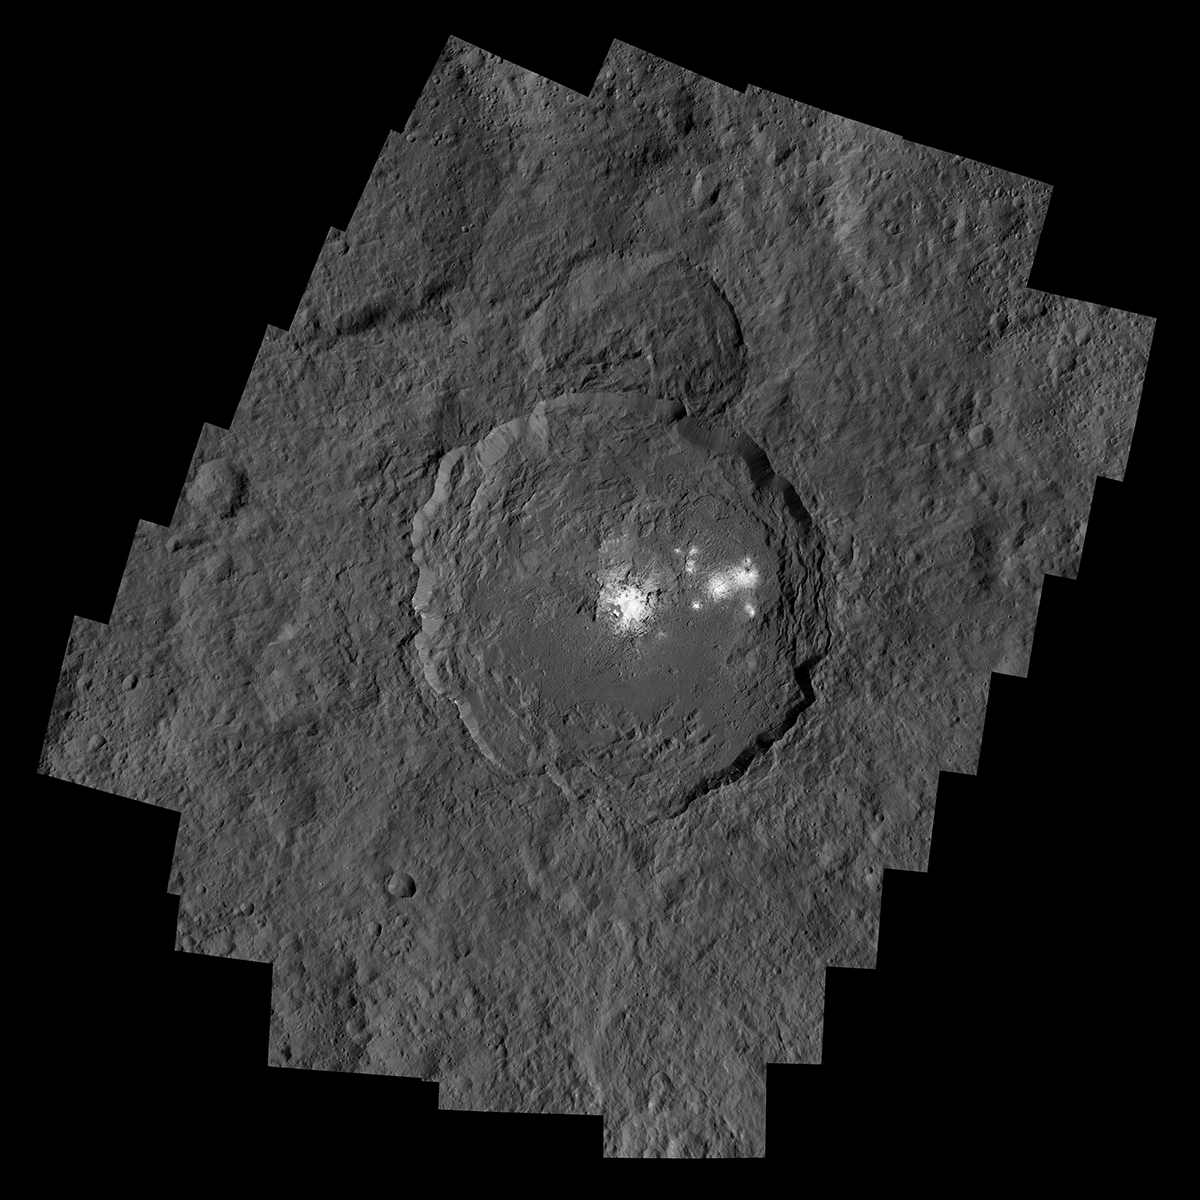 Occator Crater, measuring 57 miles (92 kilometers) across and 2.5 miles (4 kilometers) deep, contains the brightest area on Ceres.